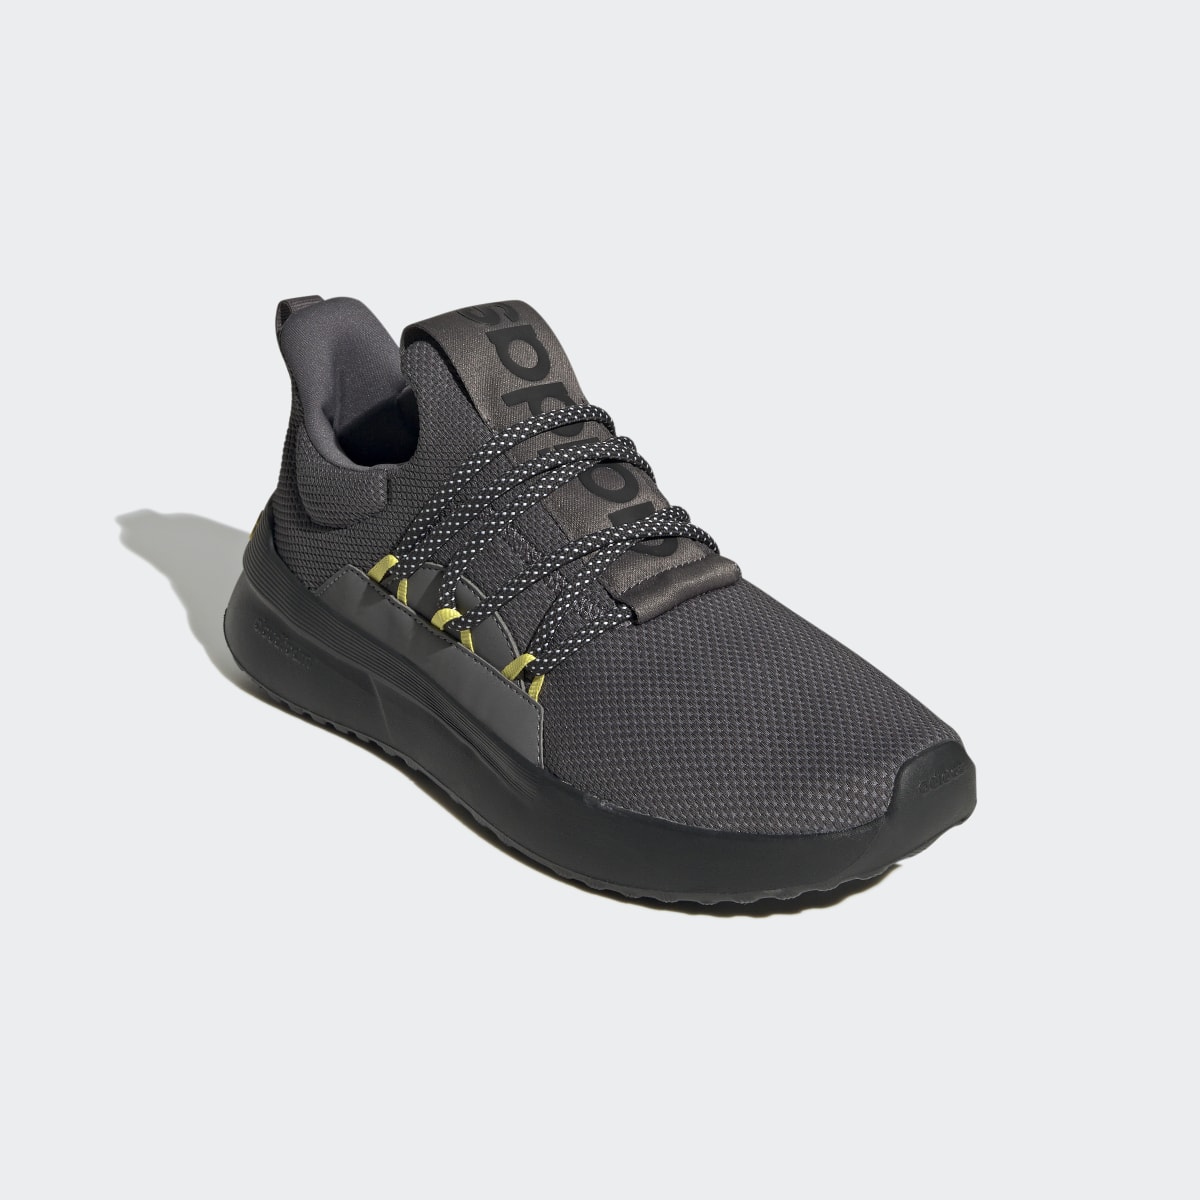 Adidas Lite Racer Adapt 5.0 Shoes. 5